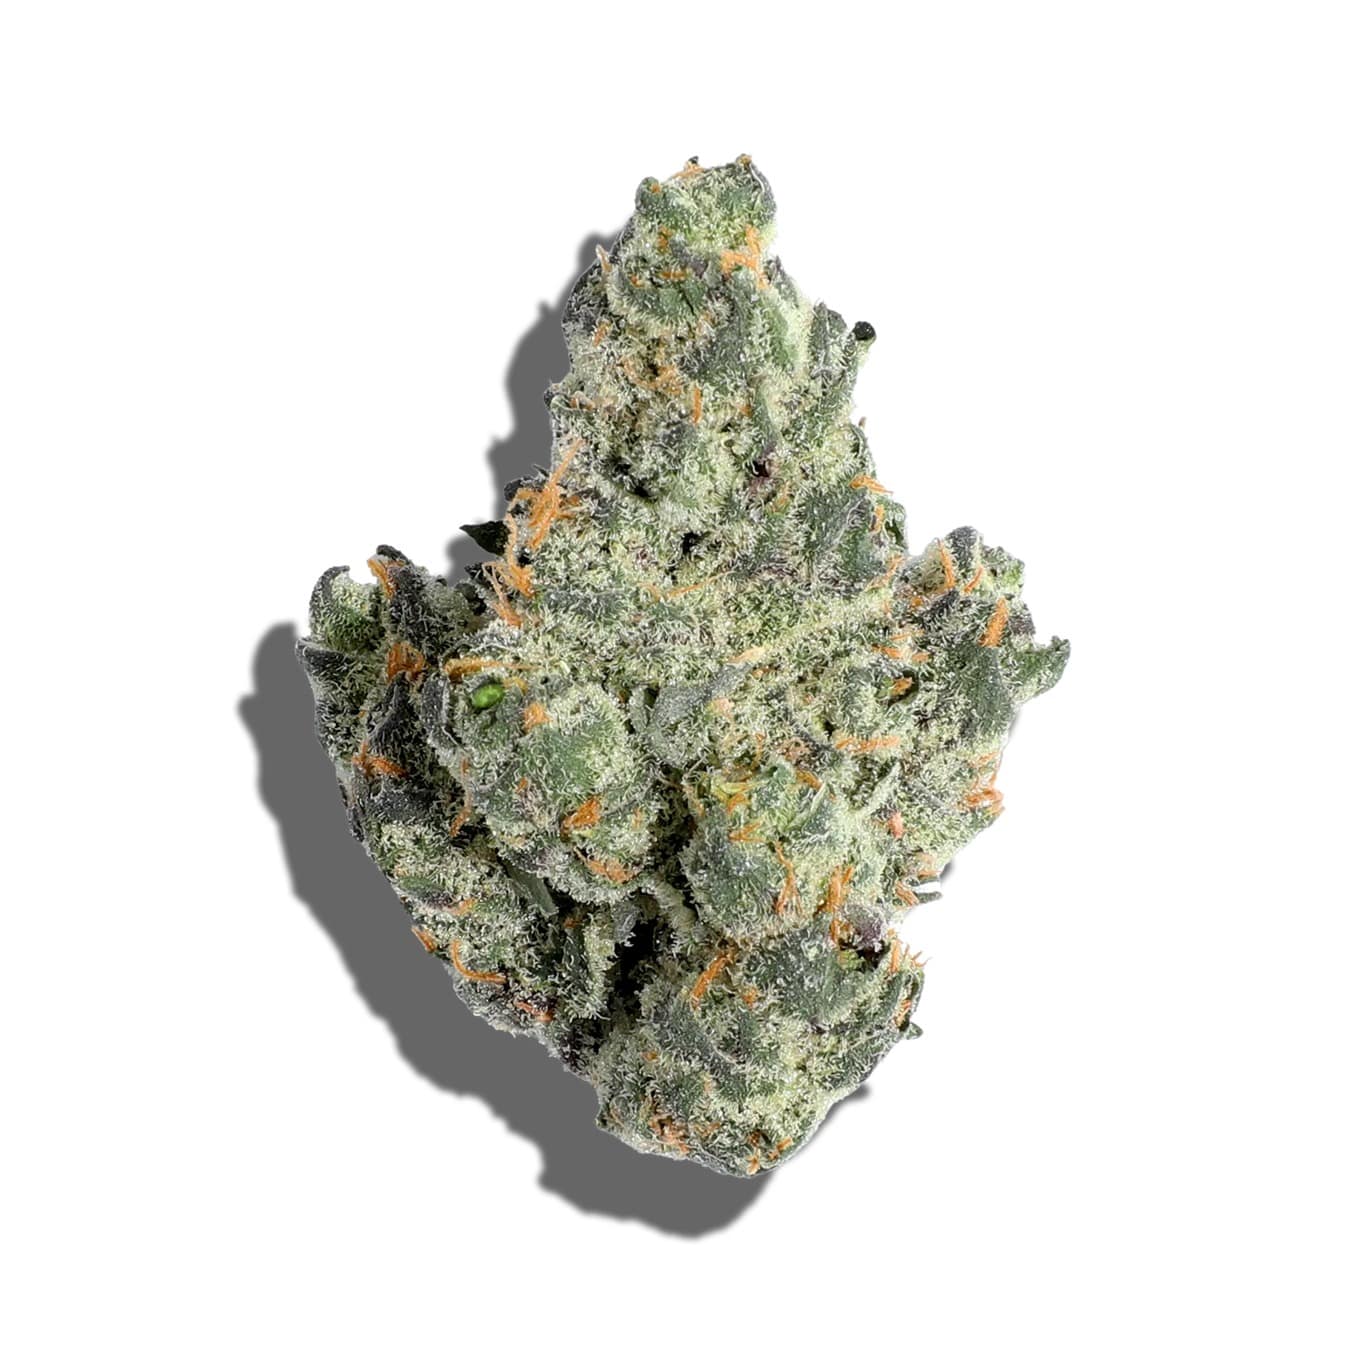 Cotton Candy indica dominant strain